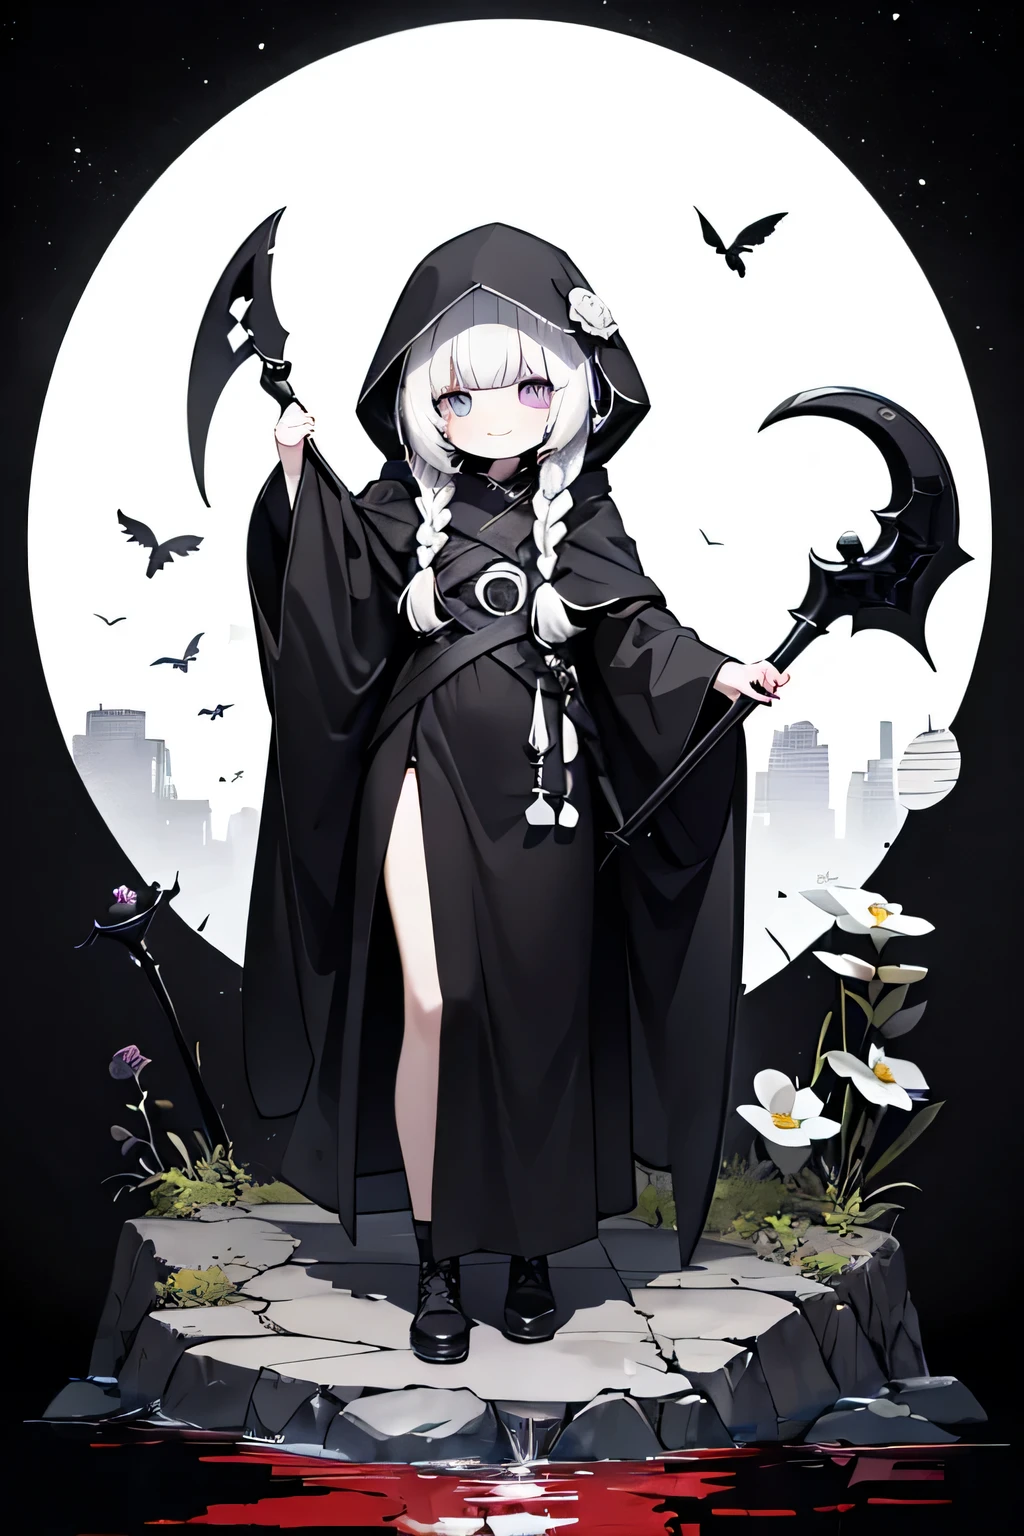 solo,1female\(cute,kawaii,age of 10,hair color white,braid hair,messy hair,eye color dark,big eyes,white skin,big smile,enjoy,full body,wearing Grim Reaper's black Robe,holding scythe and skull,skip,flower hair ornament,white hair\),background\(black sky,withered flowers all over the ground,a thick red water\), BREAK ,quality\(8k,wallpaper of extremely detailed CG unit, ​masterpiece,high resolution,top-quality,top-quality real texture skin,hyper realisitic,increase the resolution,RAW photos,best qualtiy,highly detailed,the wallpaper\)